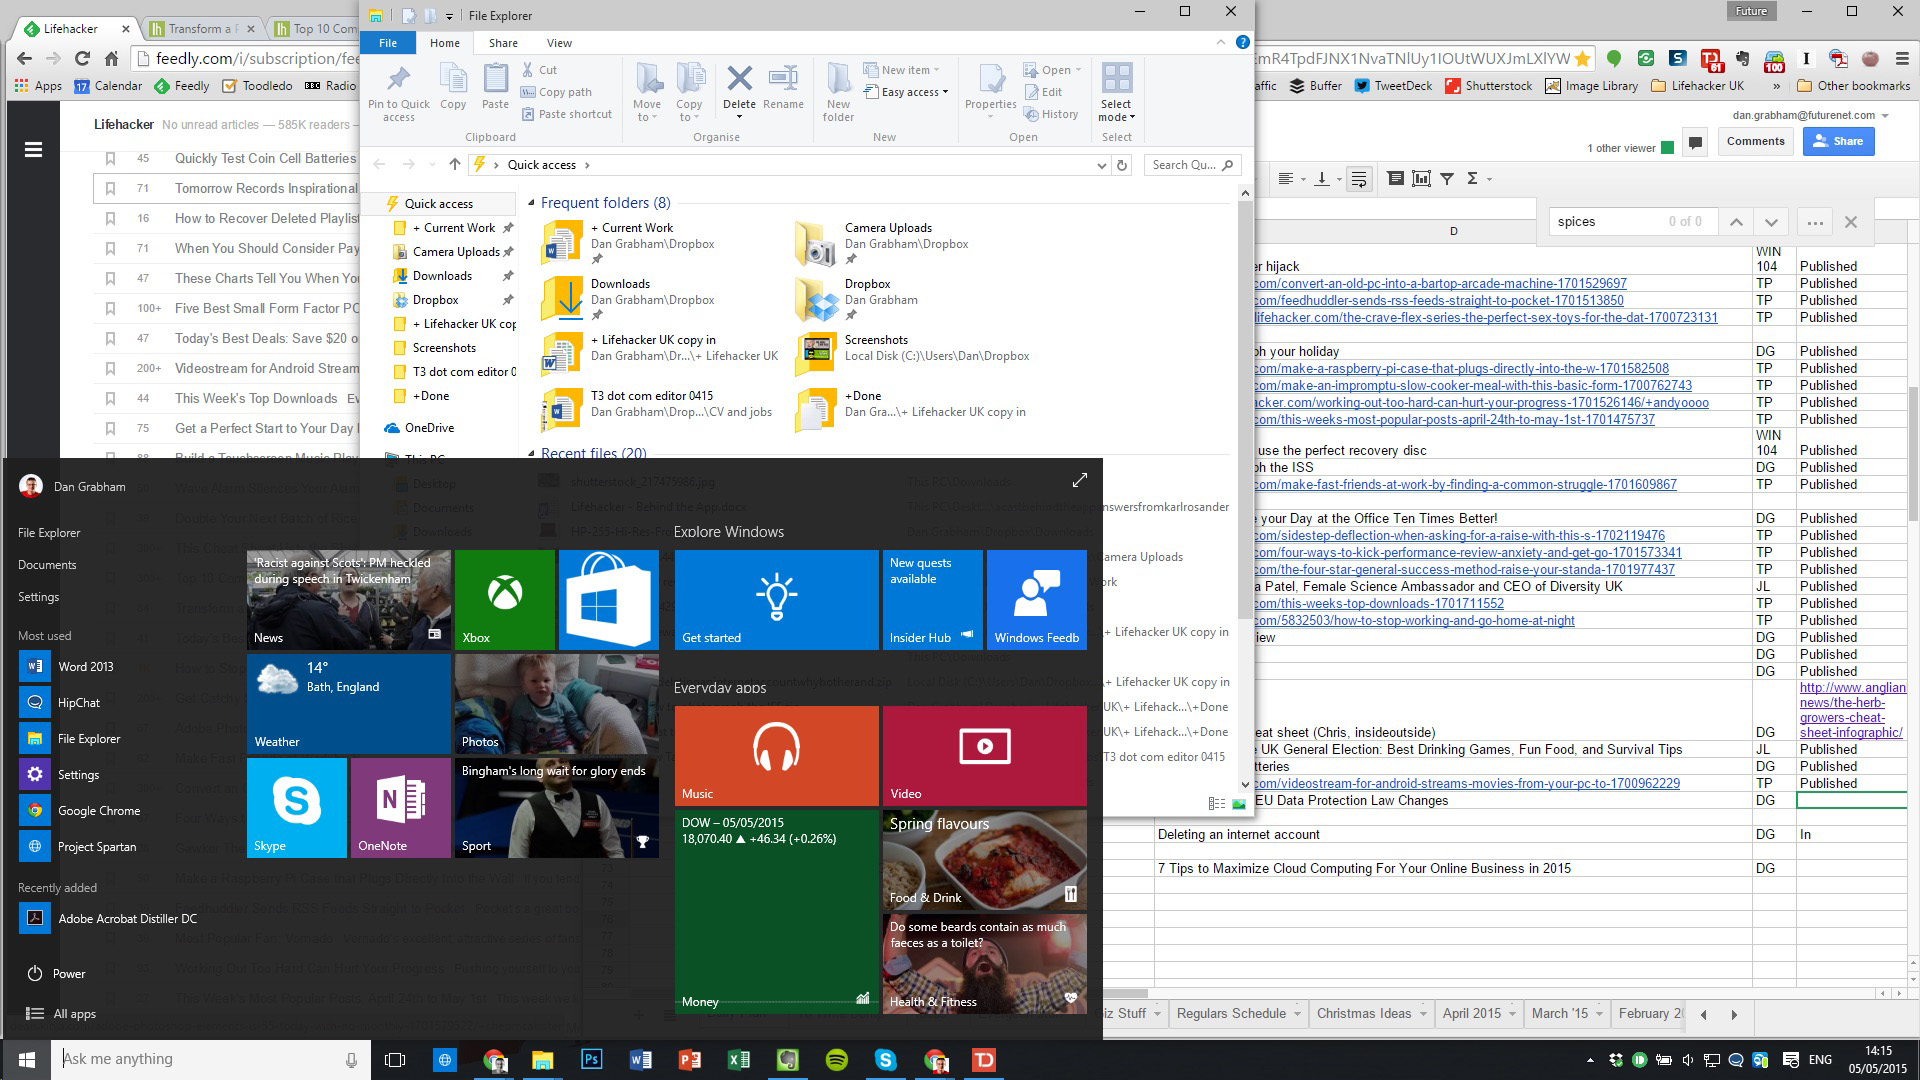 windows 10 pro insider preview build 10162